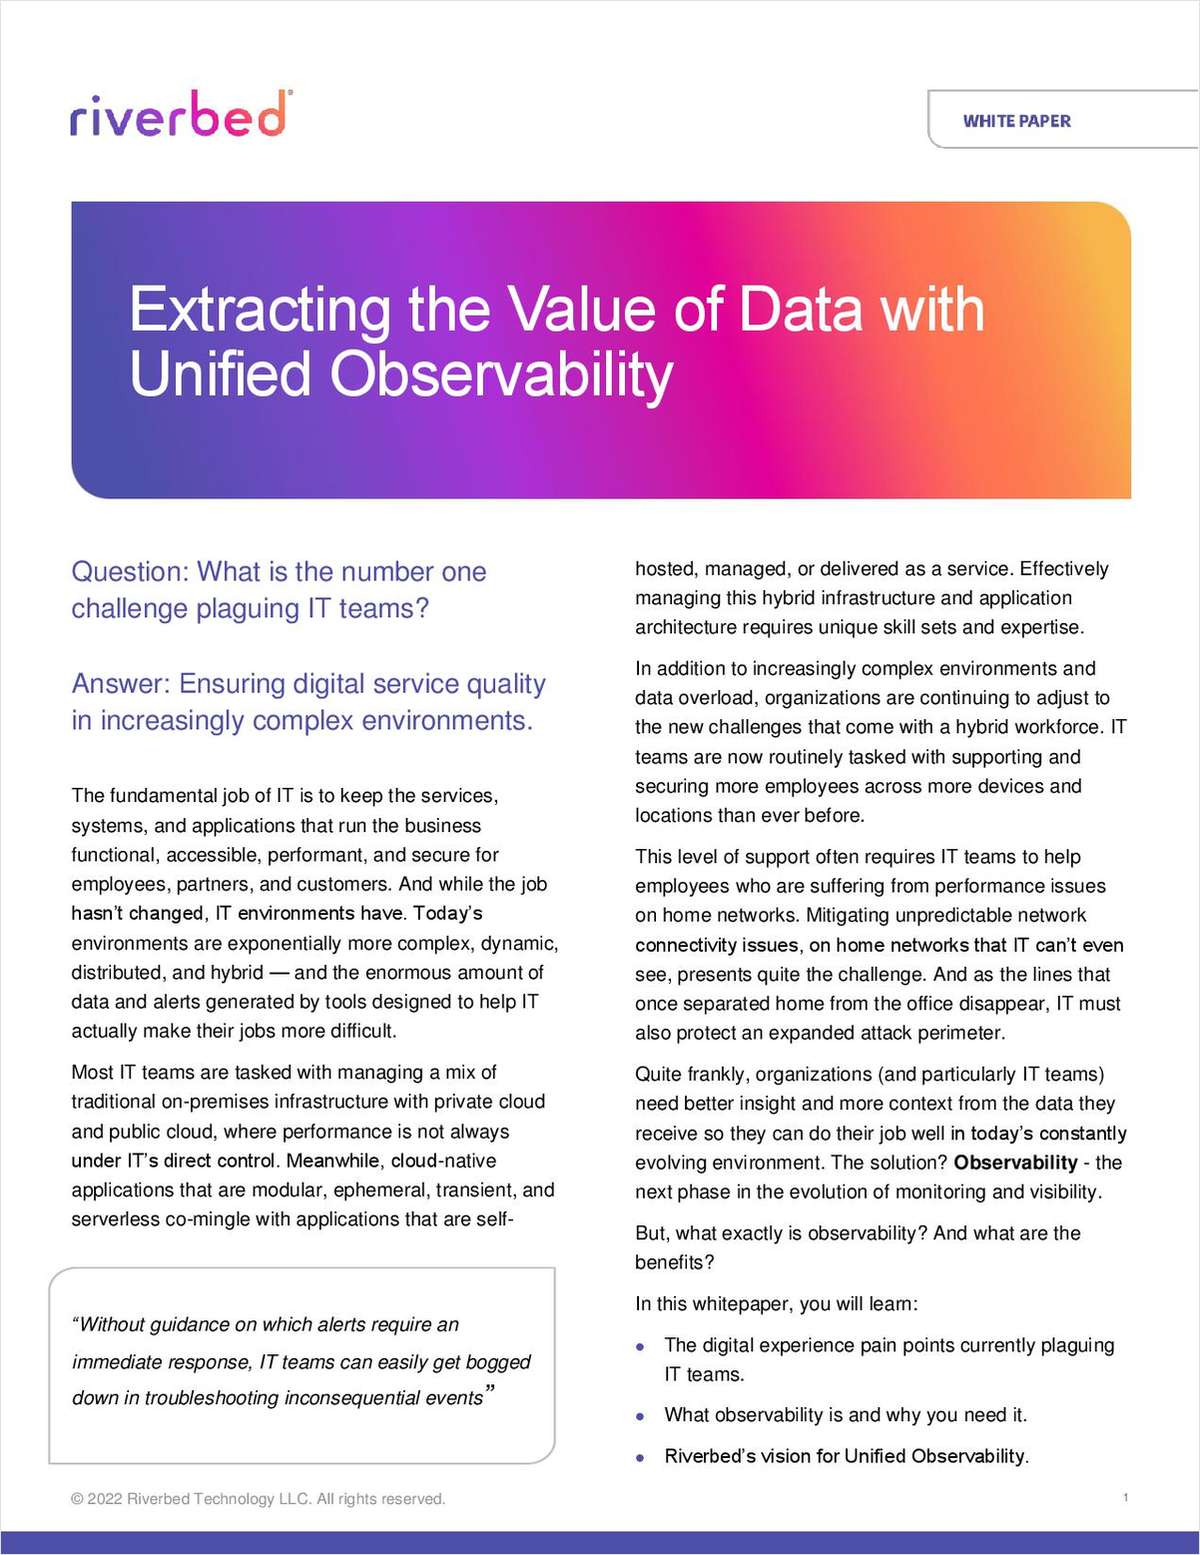 Extracting Value with Unified Observability